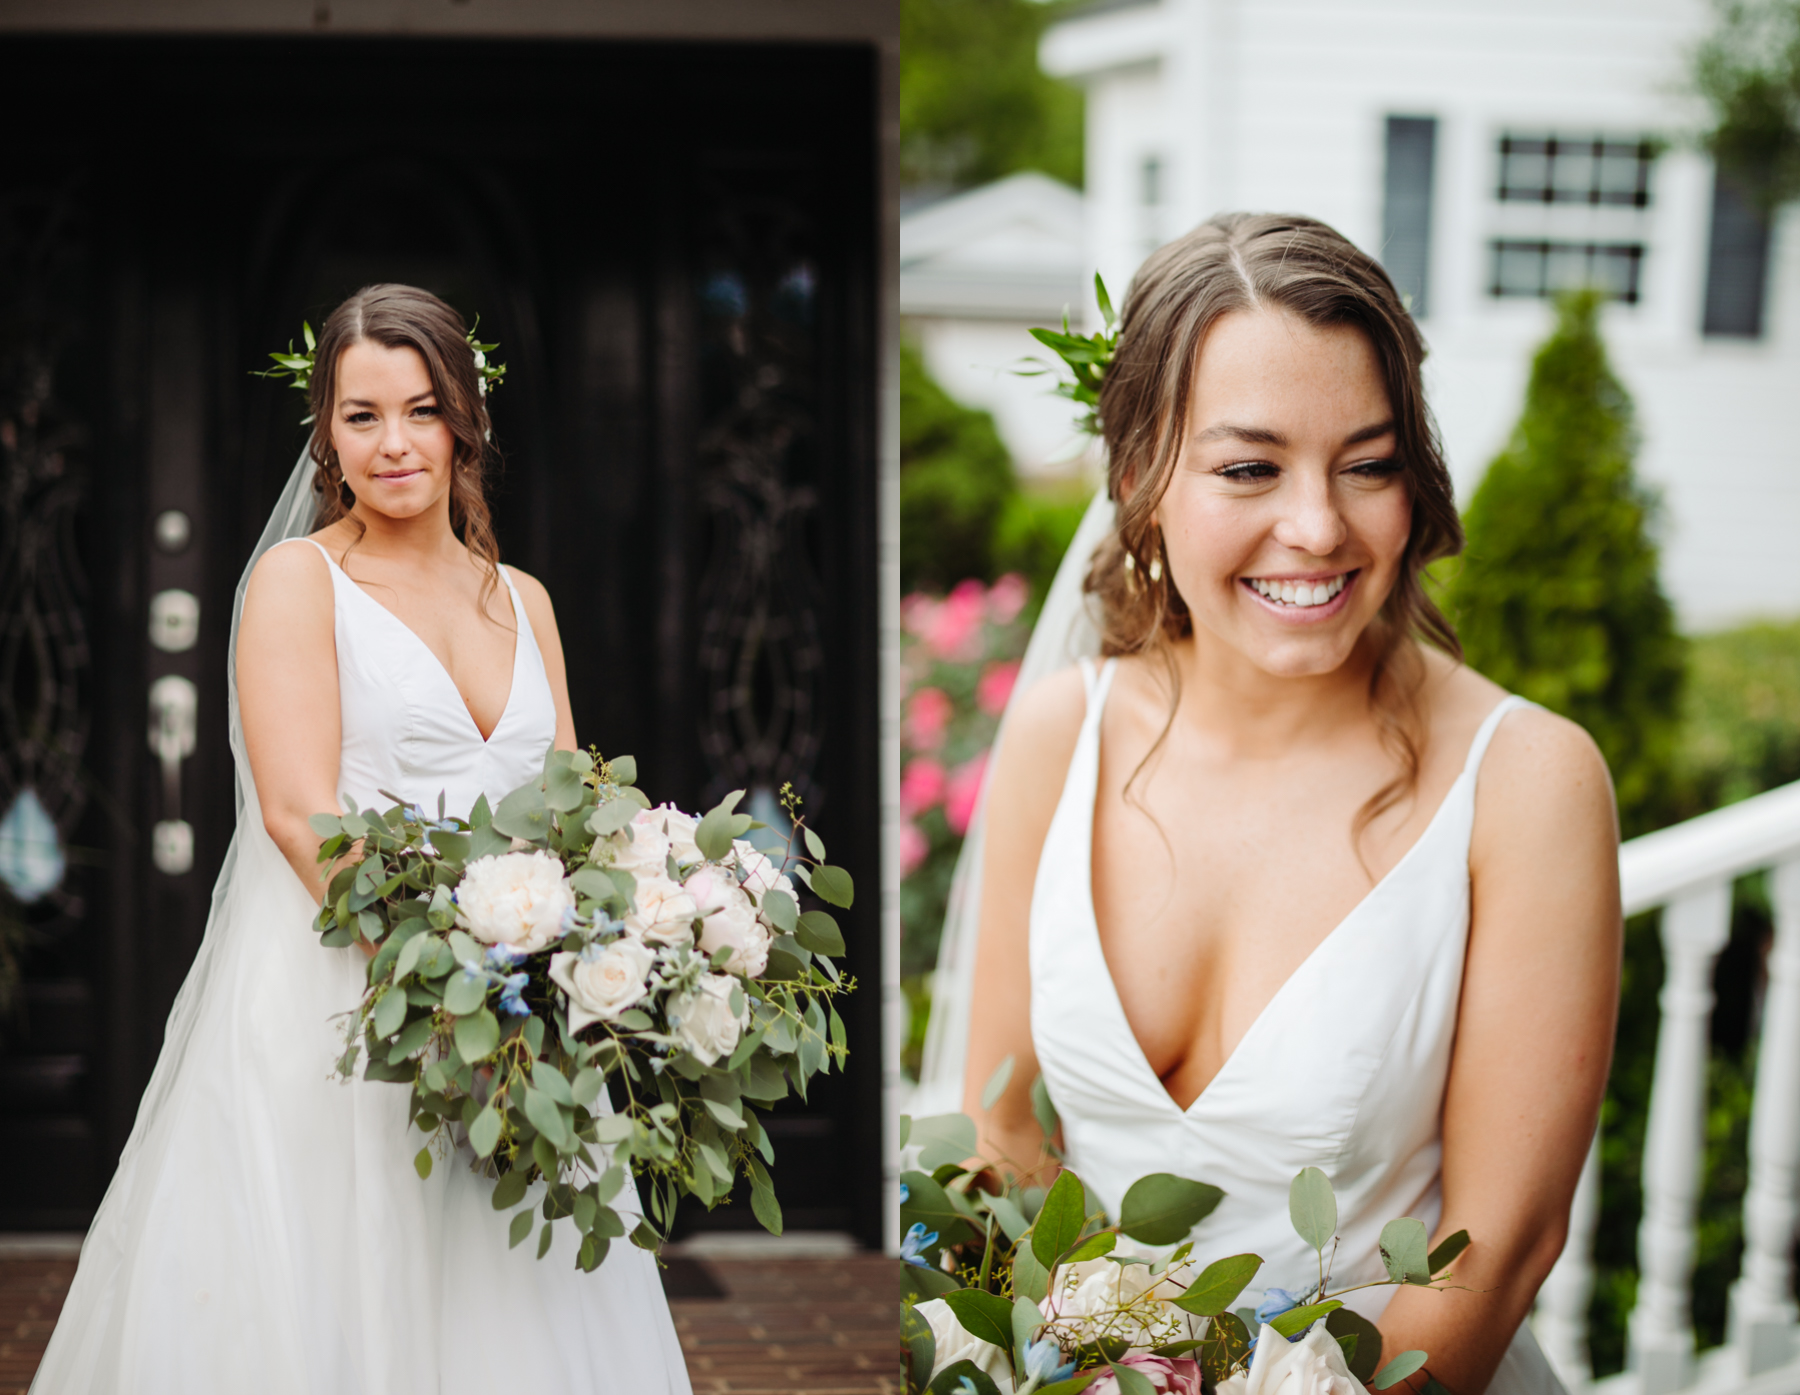 Bridal portraits before a Sunny summer wedding at Dara's Garden in Knoxville, Tennessee 